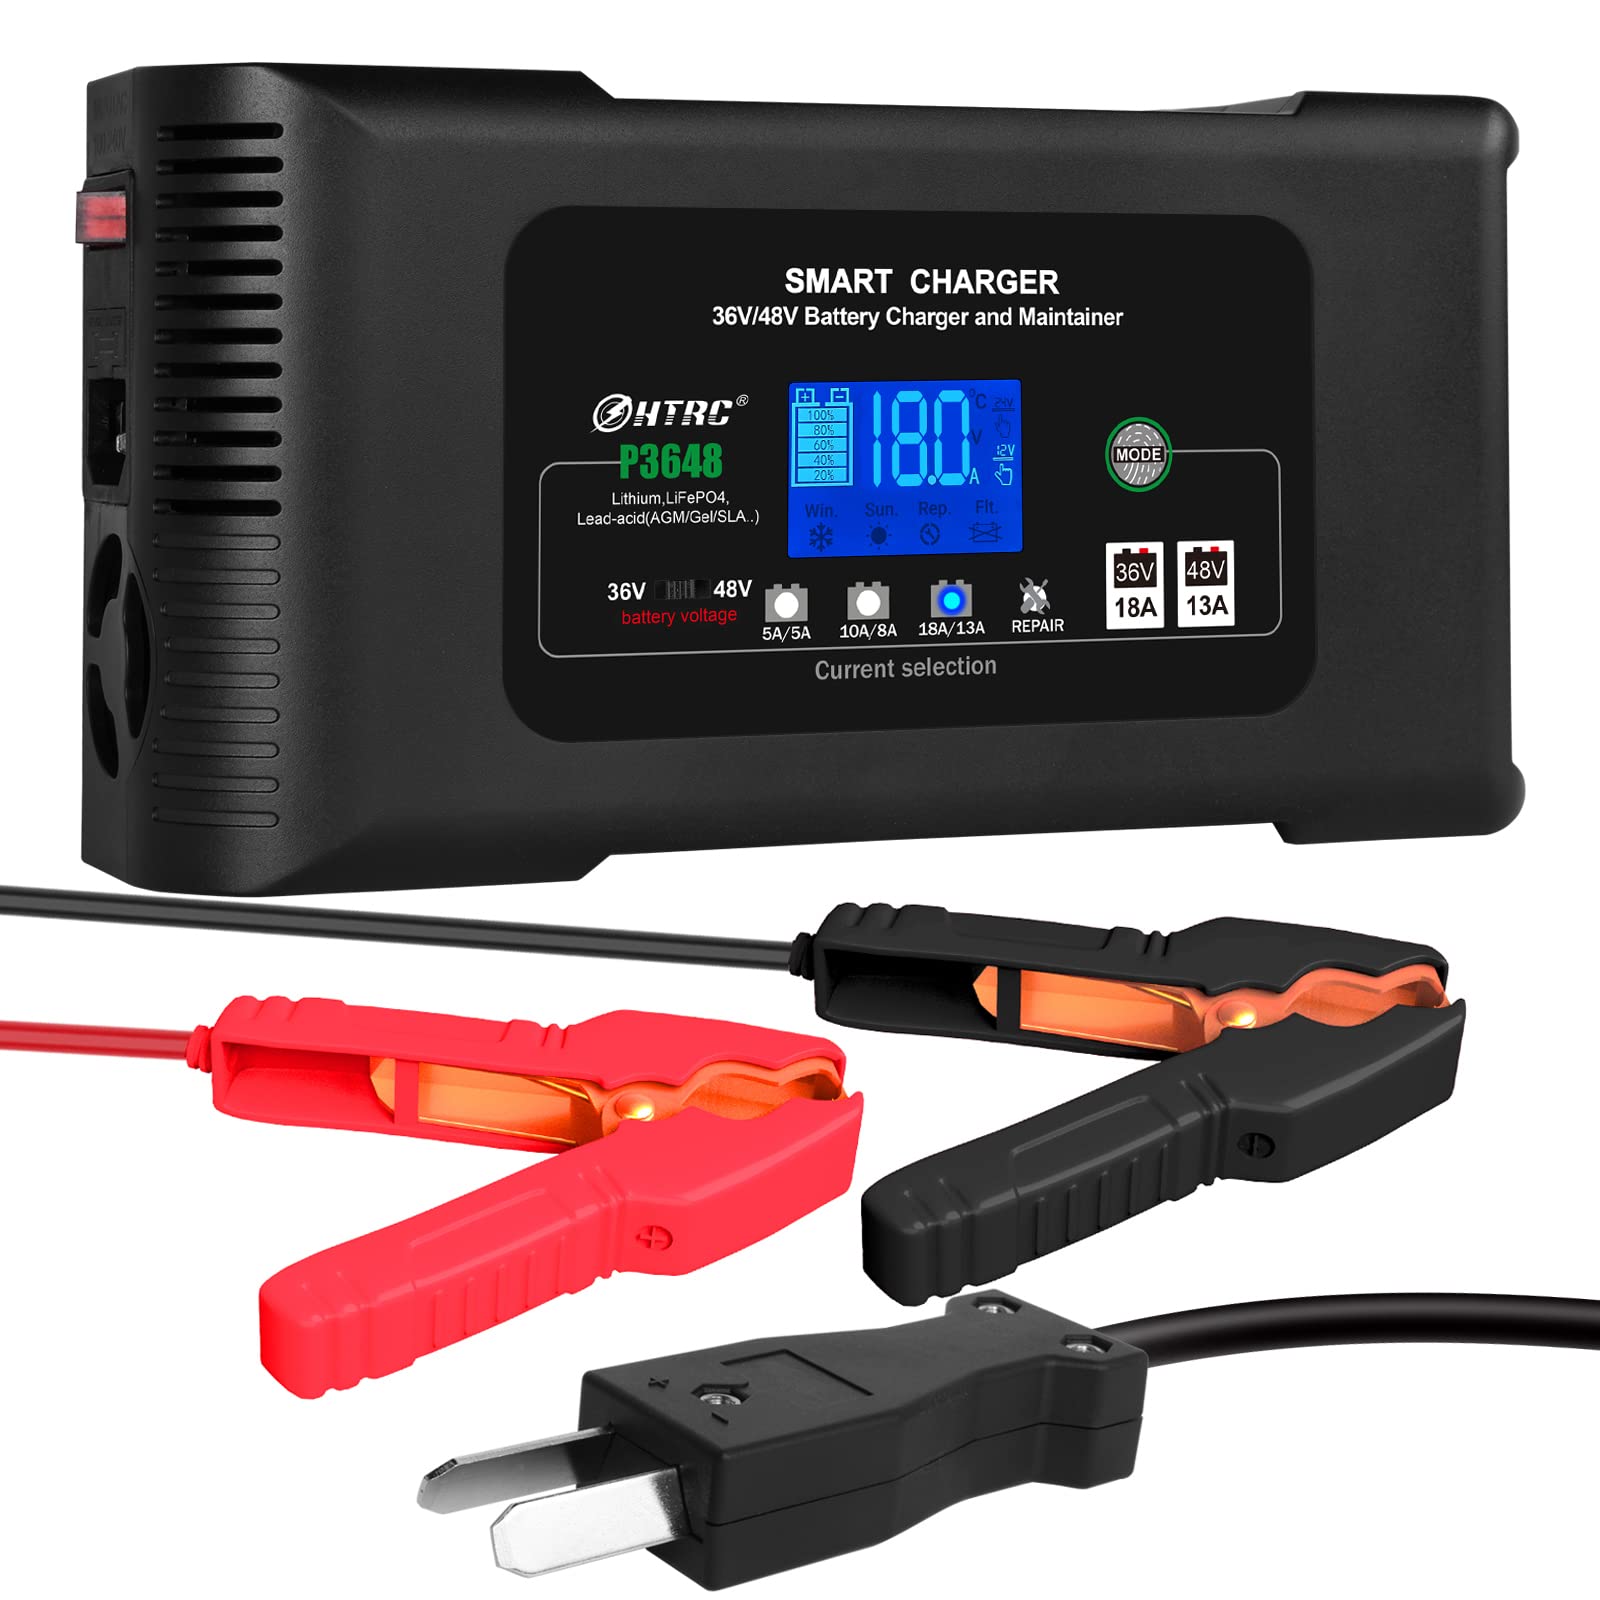 HTRC 48V Golf cart Charger , Car Battery Charger